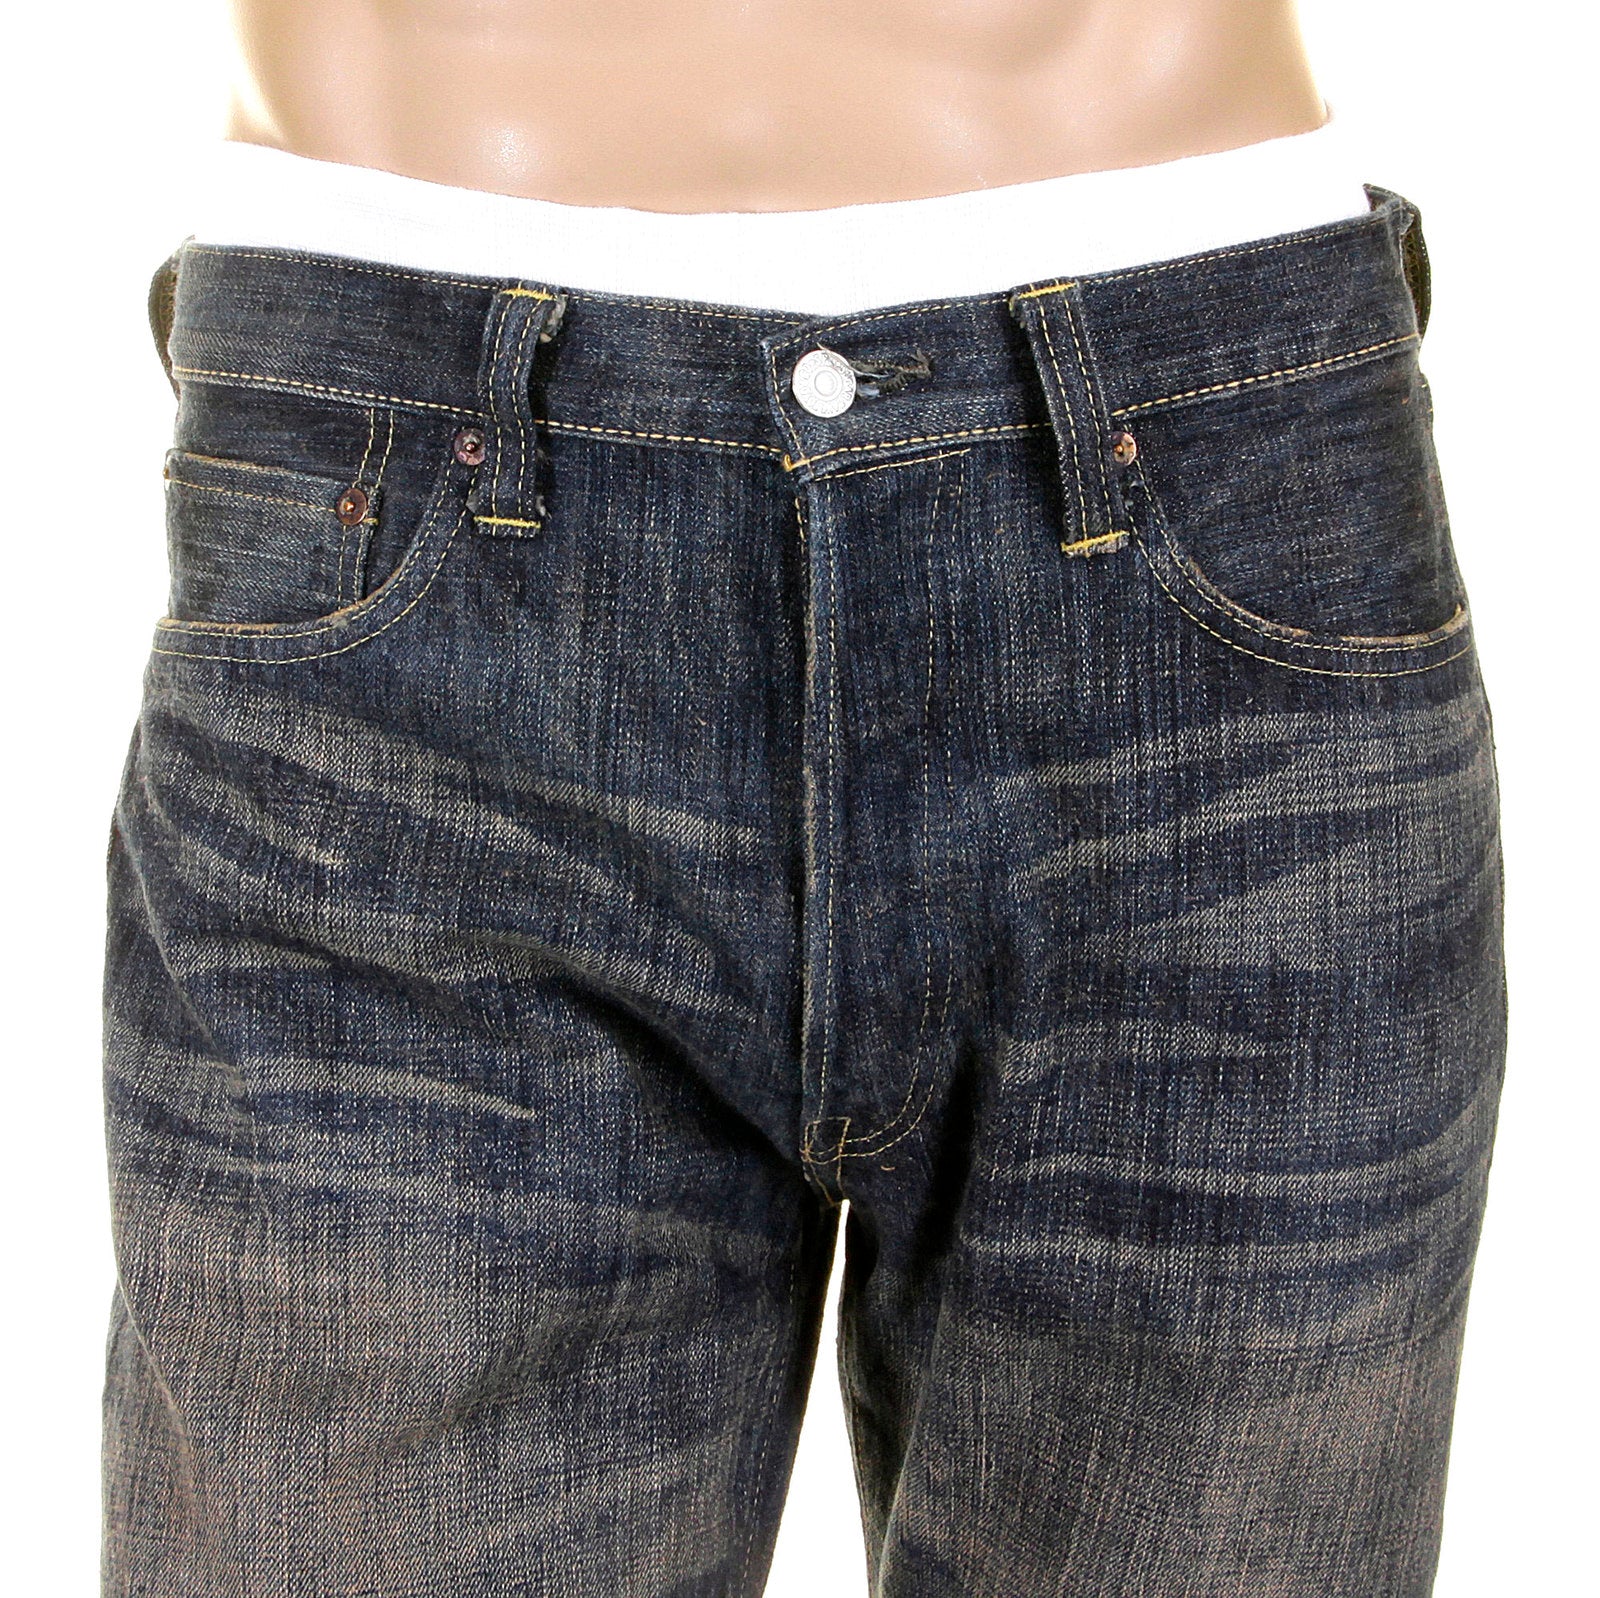 What Are Hard-Washed Jeans?